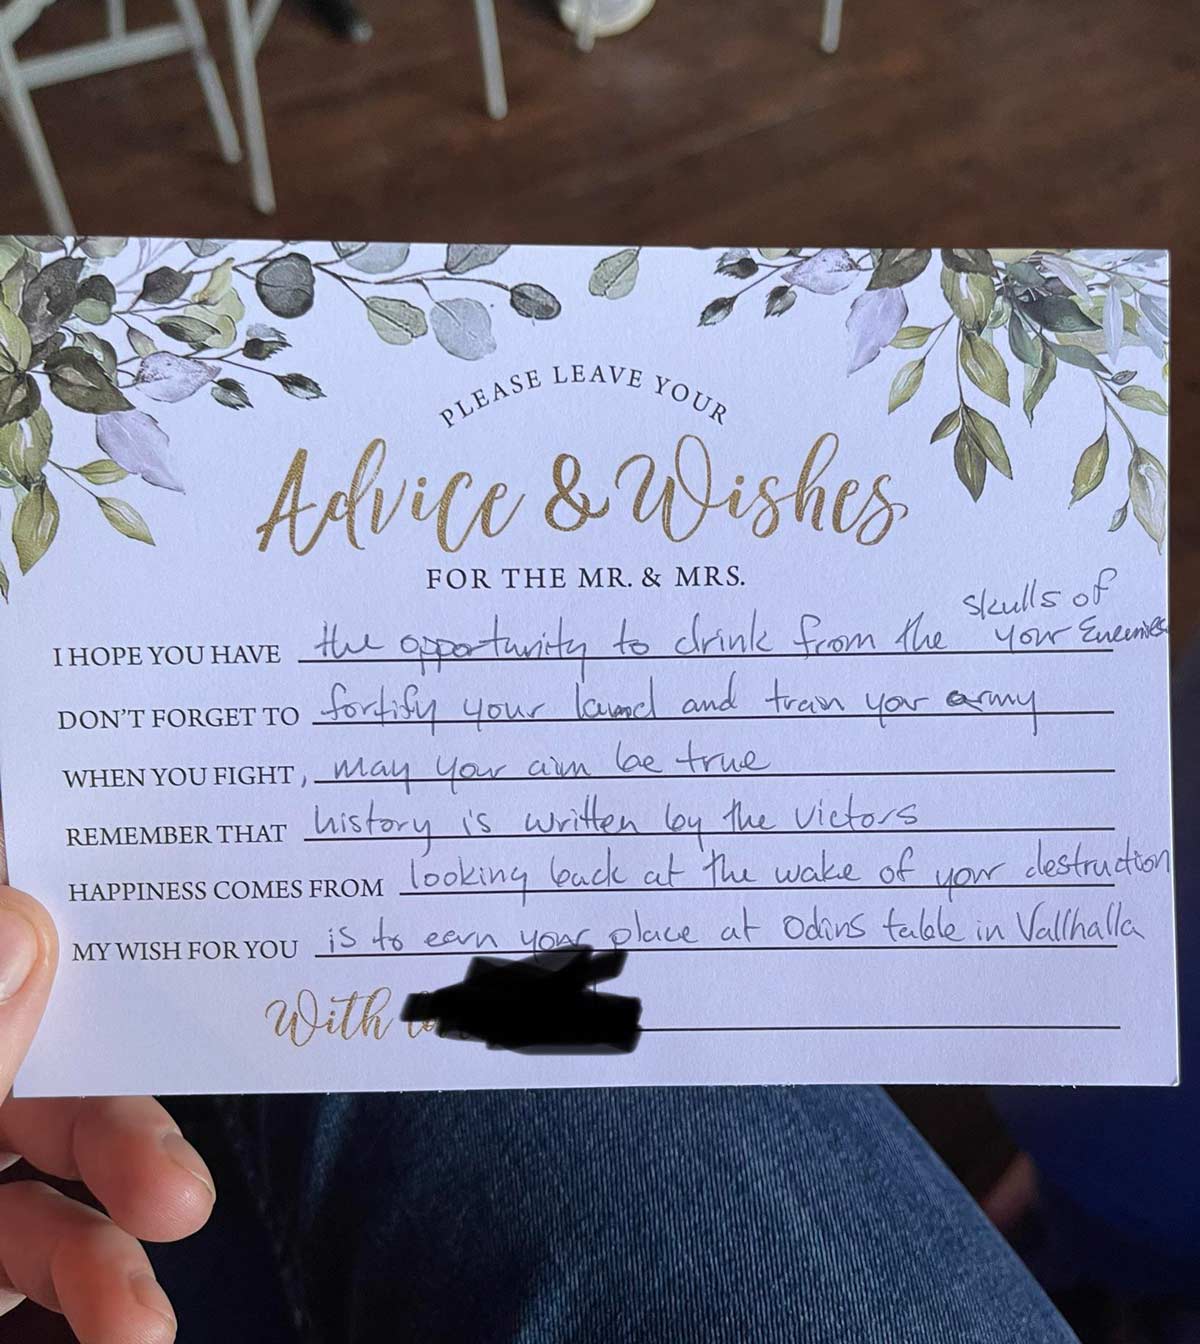 My wife made me fill out a card for her cousins wedding shower